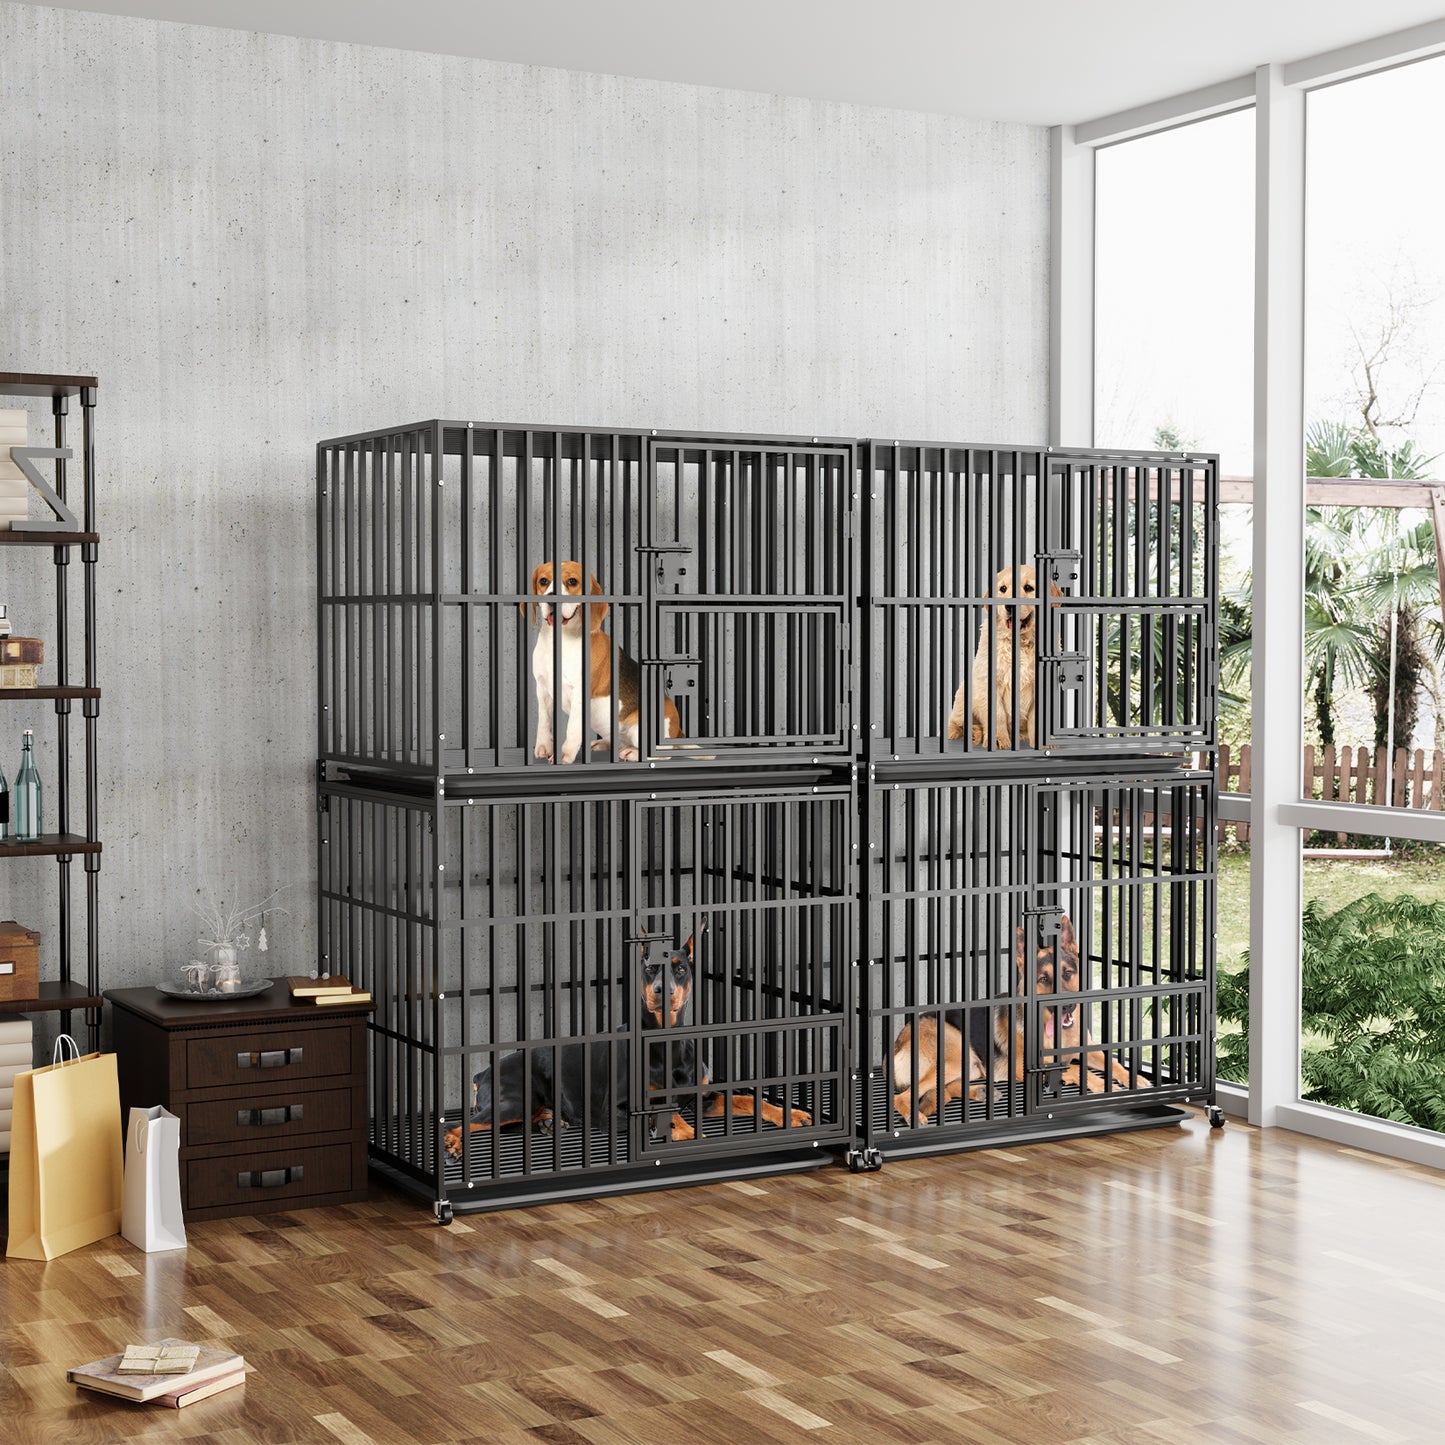 Stackable Dog Cage: Heavy Metal Dog Kennel Square Tube Cage with Double Layers Stackable Pet Crate w/ Casters, Removable Tray, Lock Latch